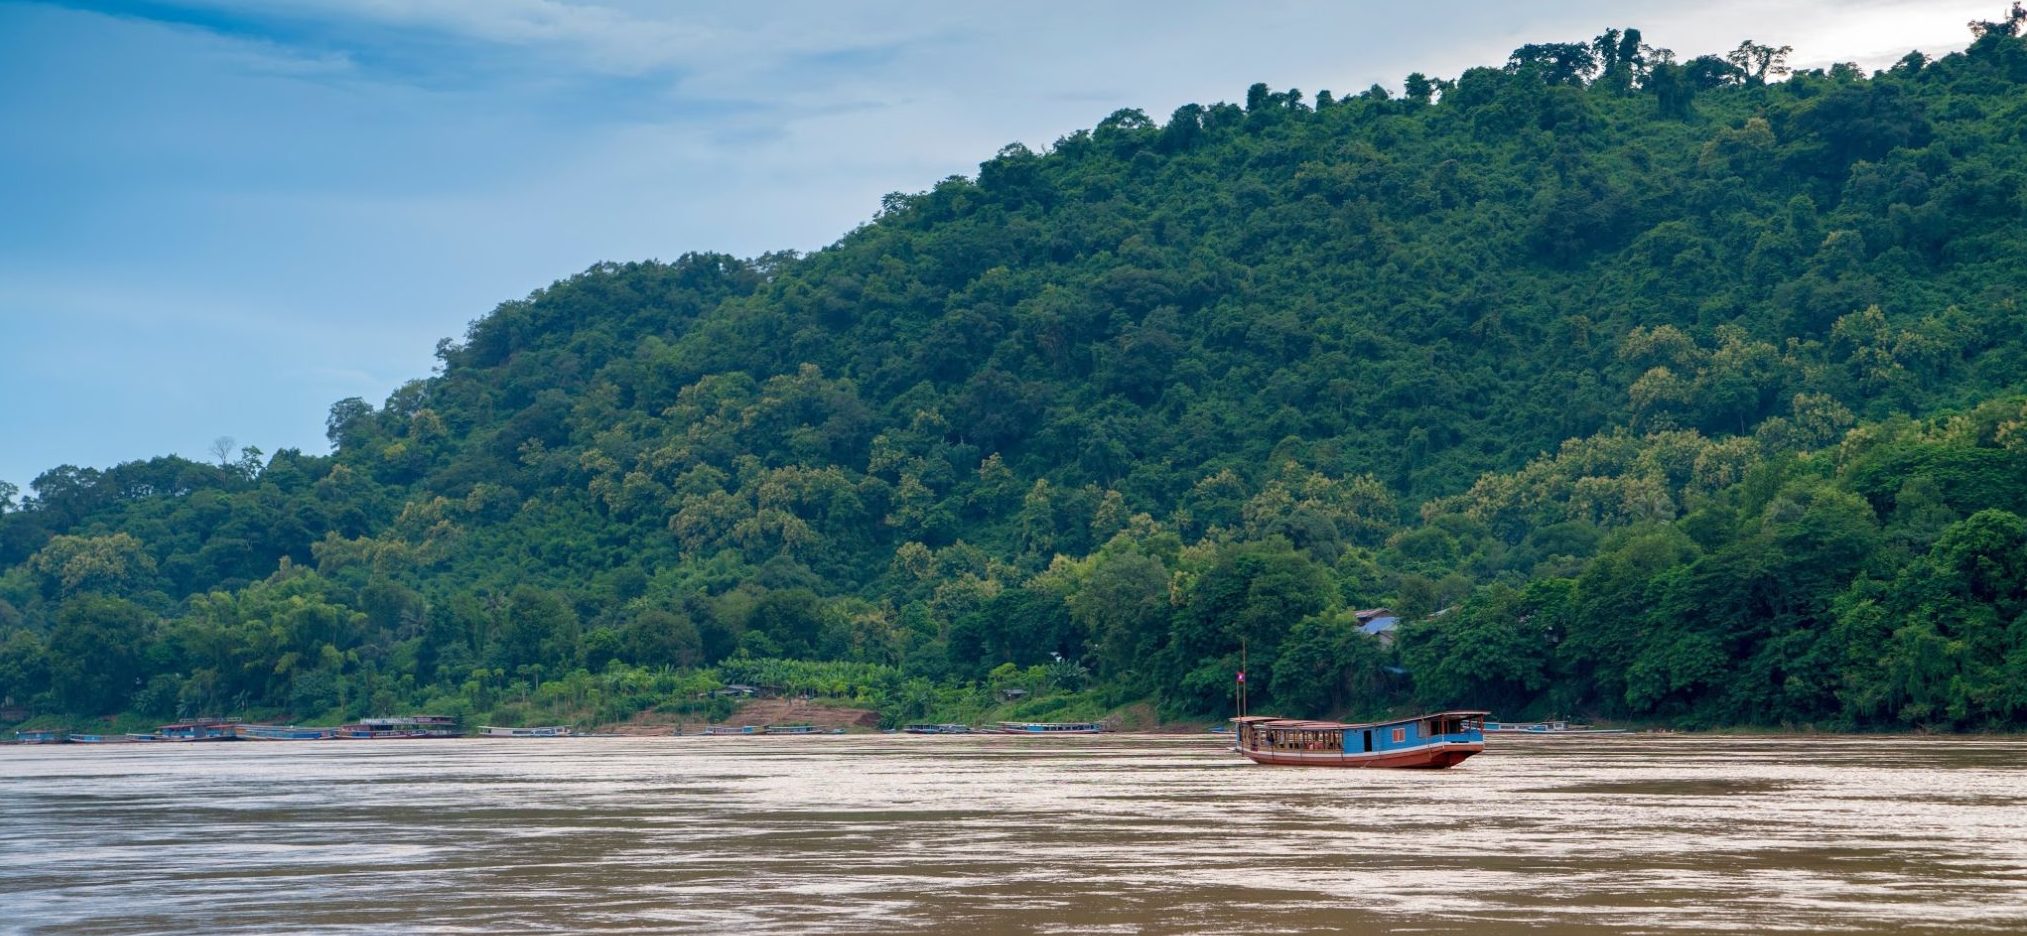 A slow boat to Laos on the Mekong River with a tree covered hill in the background